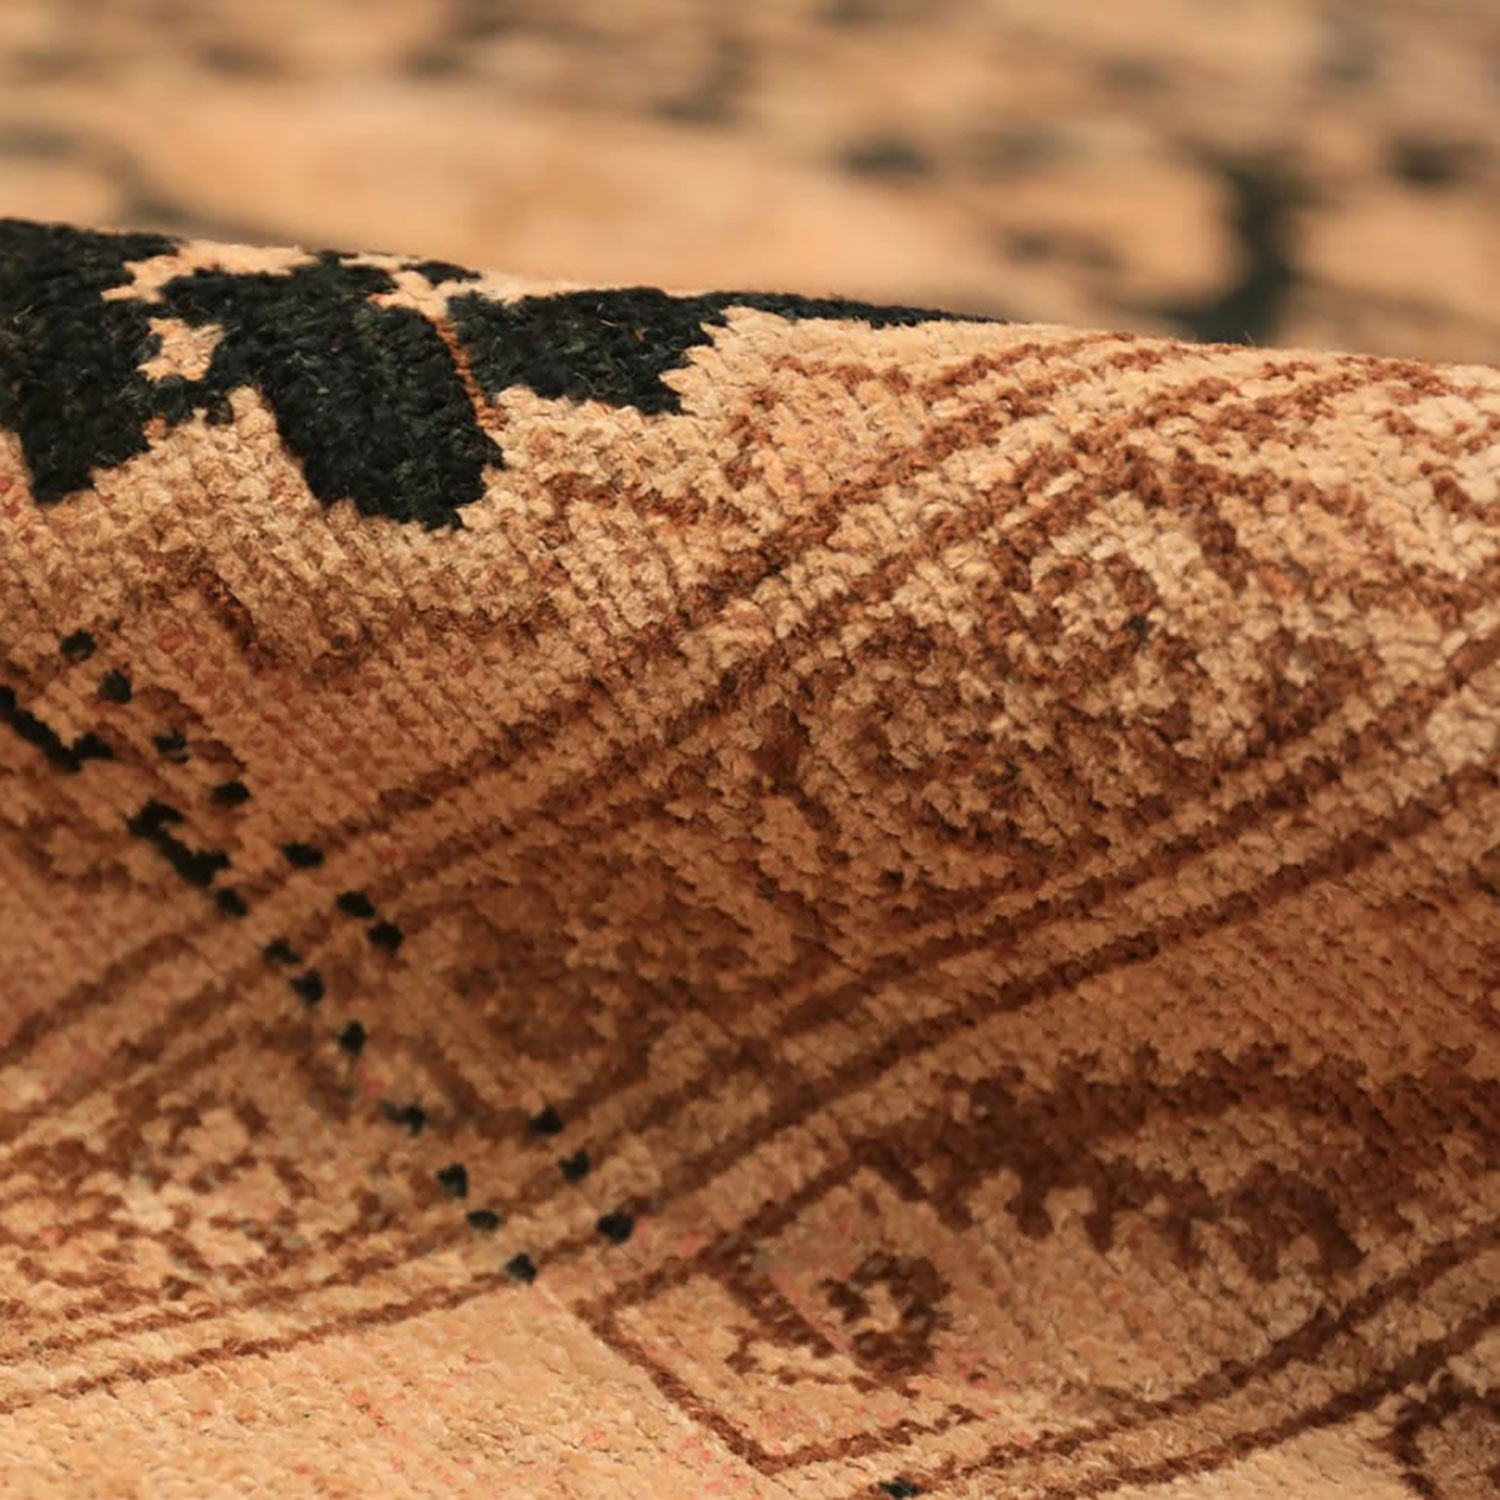 Close-up of rolled-up carpet revealing intricate pattern and dark accents.